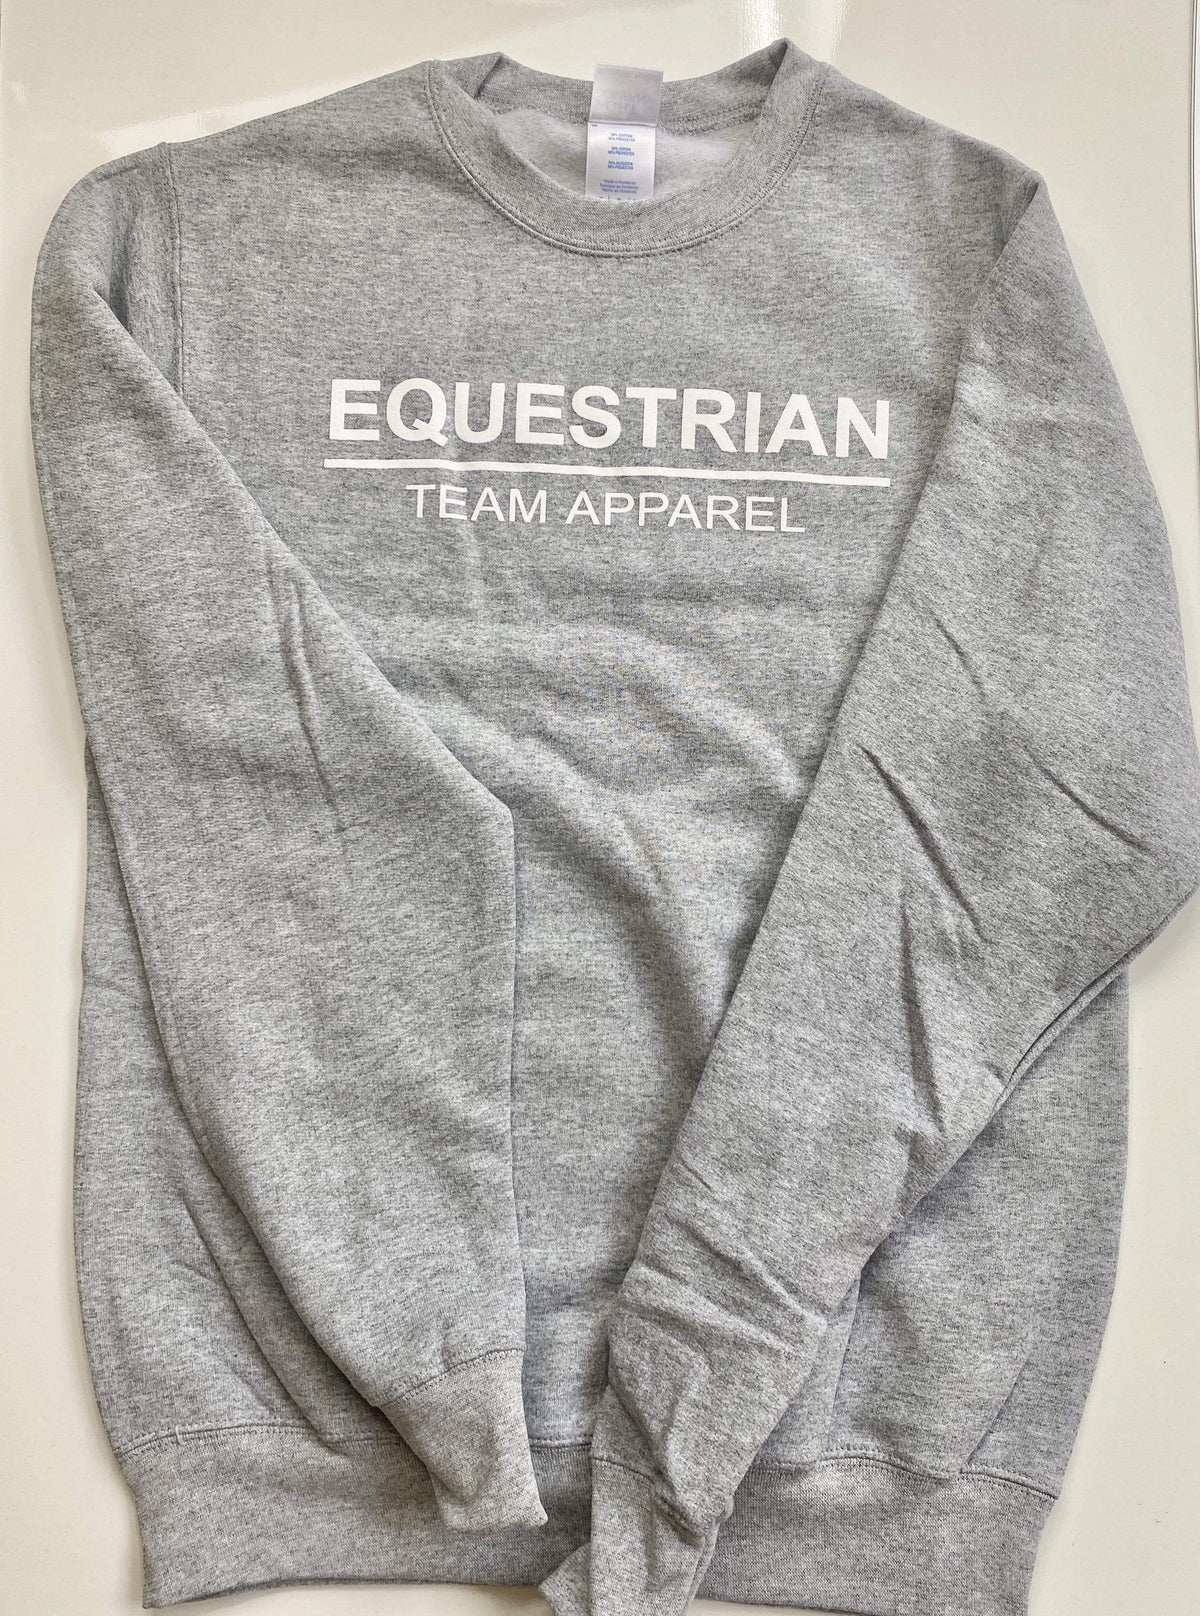 Equestrian Team Apparel Women's Sweat Shirt S / Light Grey ETA Sweatshirts equestrian team apparel online tack store mobile tack store custom farm apparel custom show stable clothing equestrian lifestyle horse show clothing riding clothes horses equestrian tack store